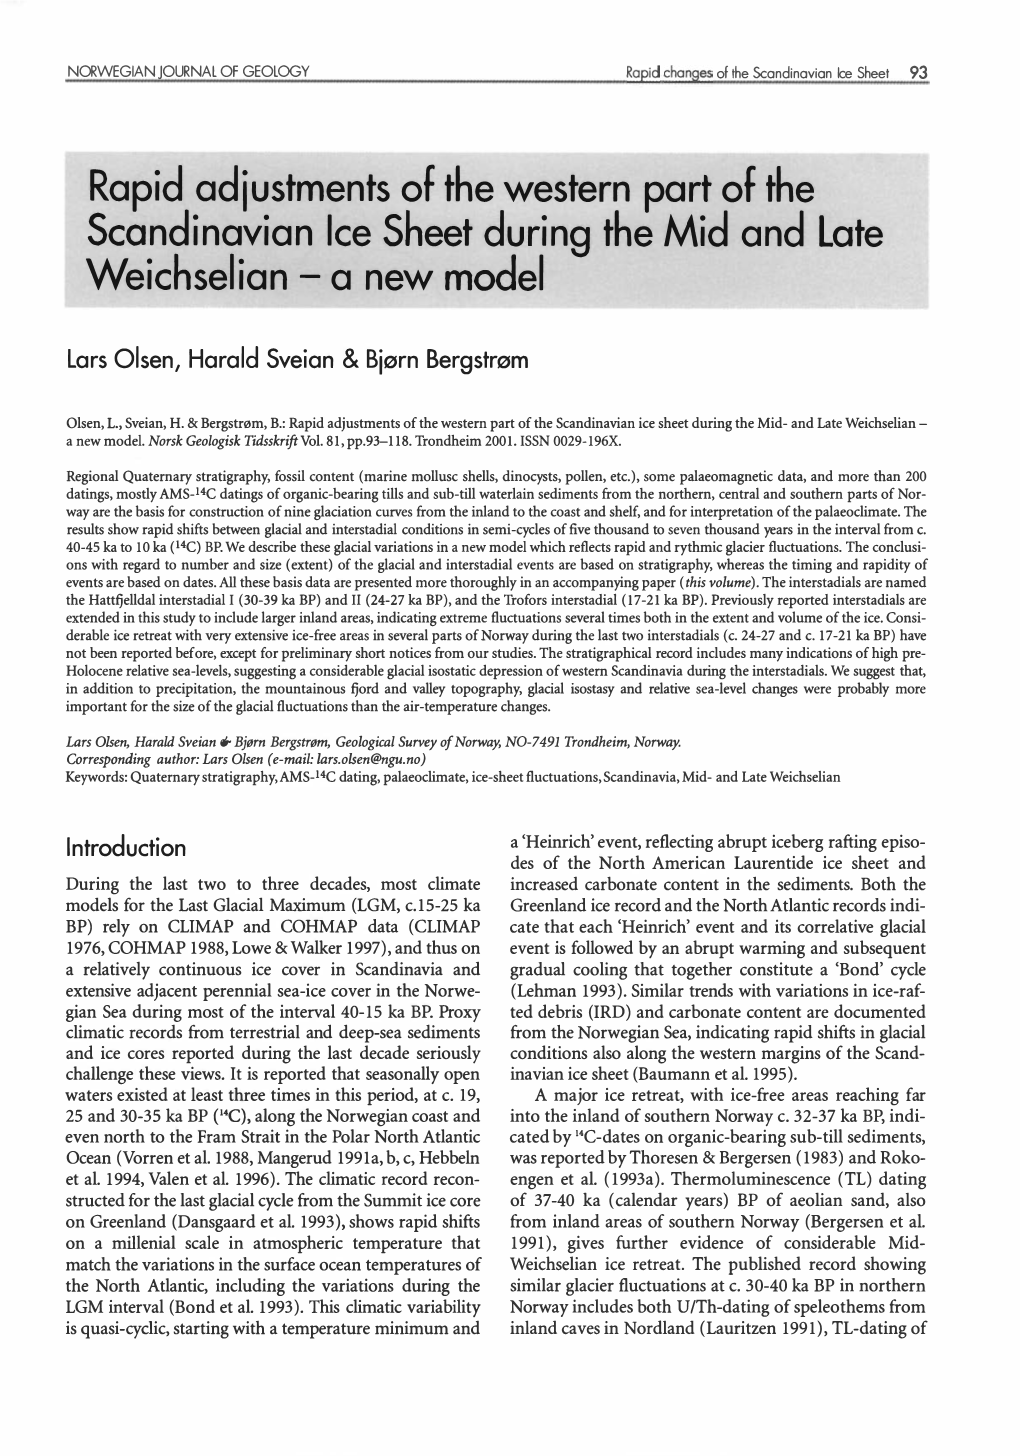 Rapid Adiustments of the Western Part of the Scandinavian Lee Sheet During the Mid and Late Weichselian - a New Model